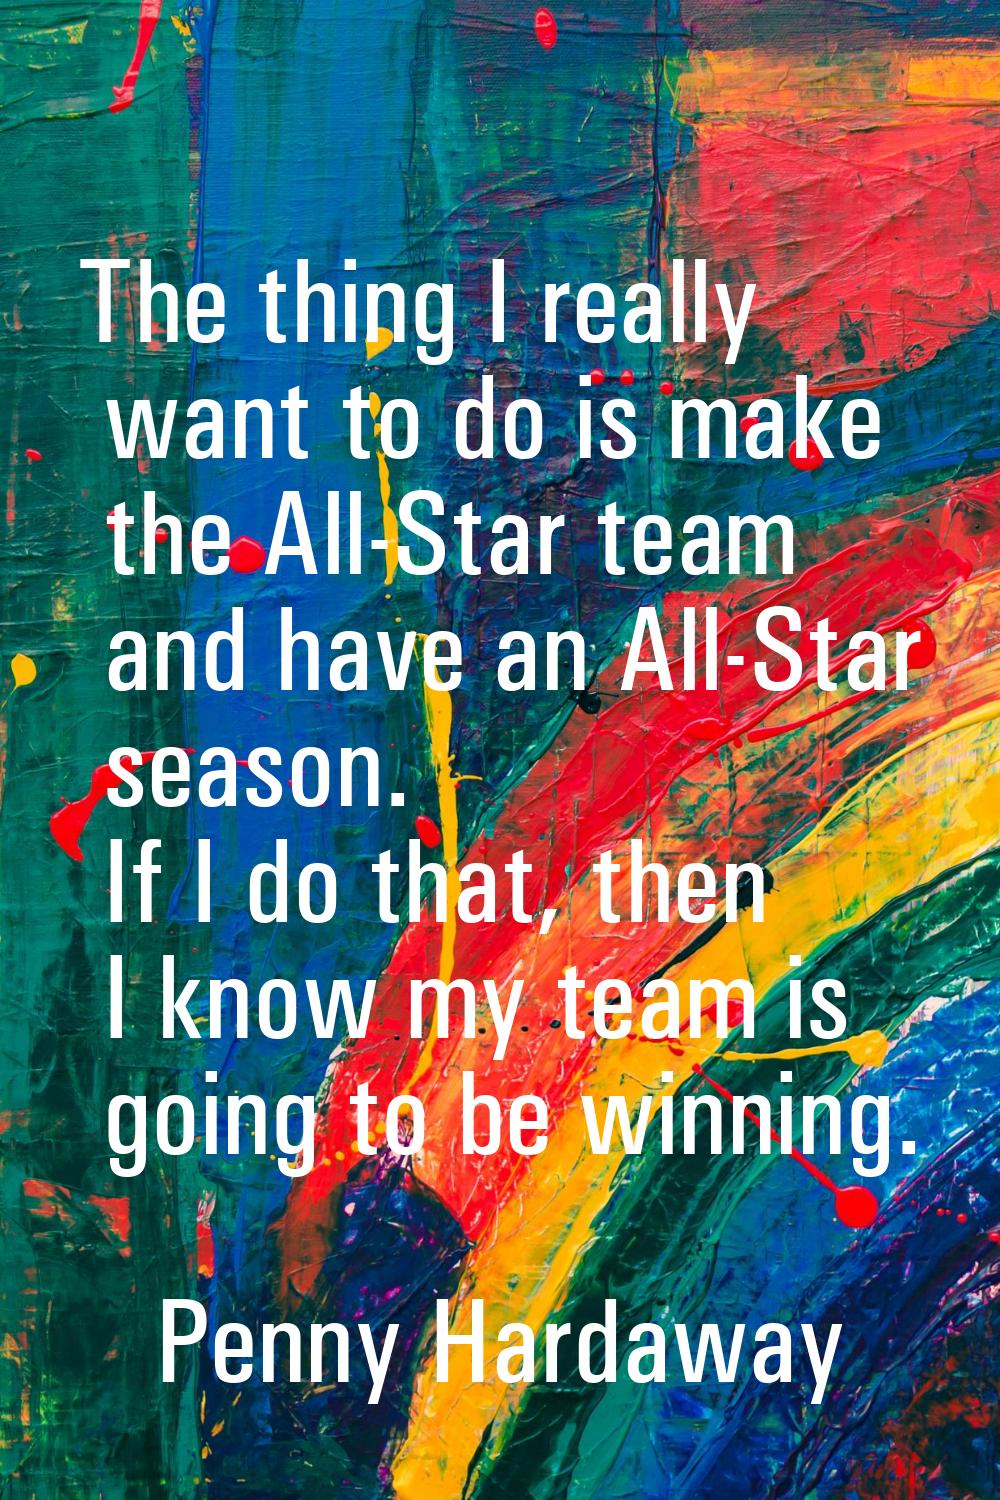 The thing I really want to do is make the All-Star team and have an All-Star season. If I do that, 